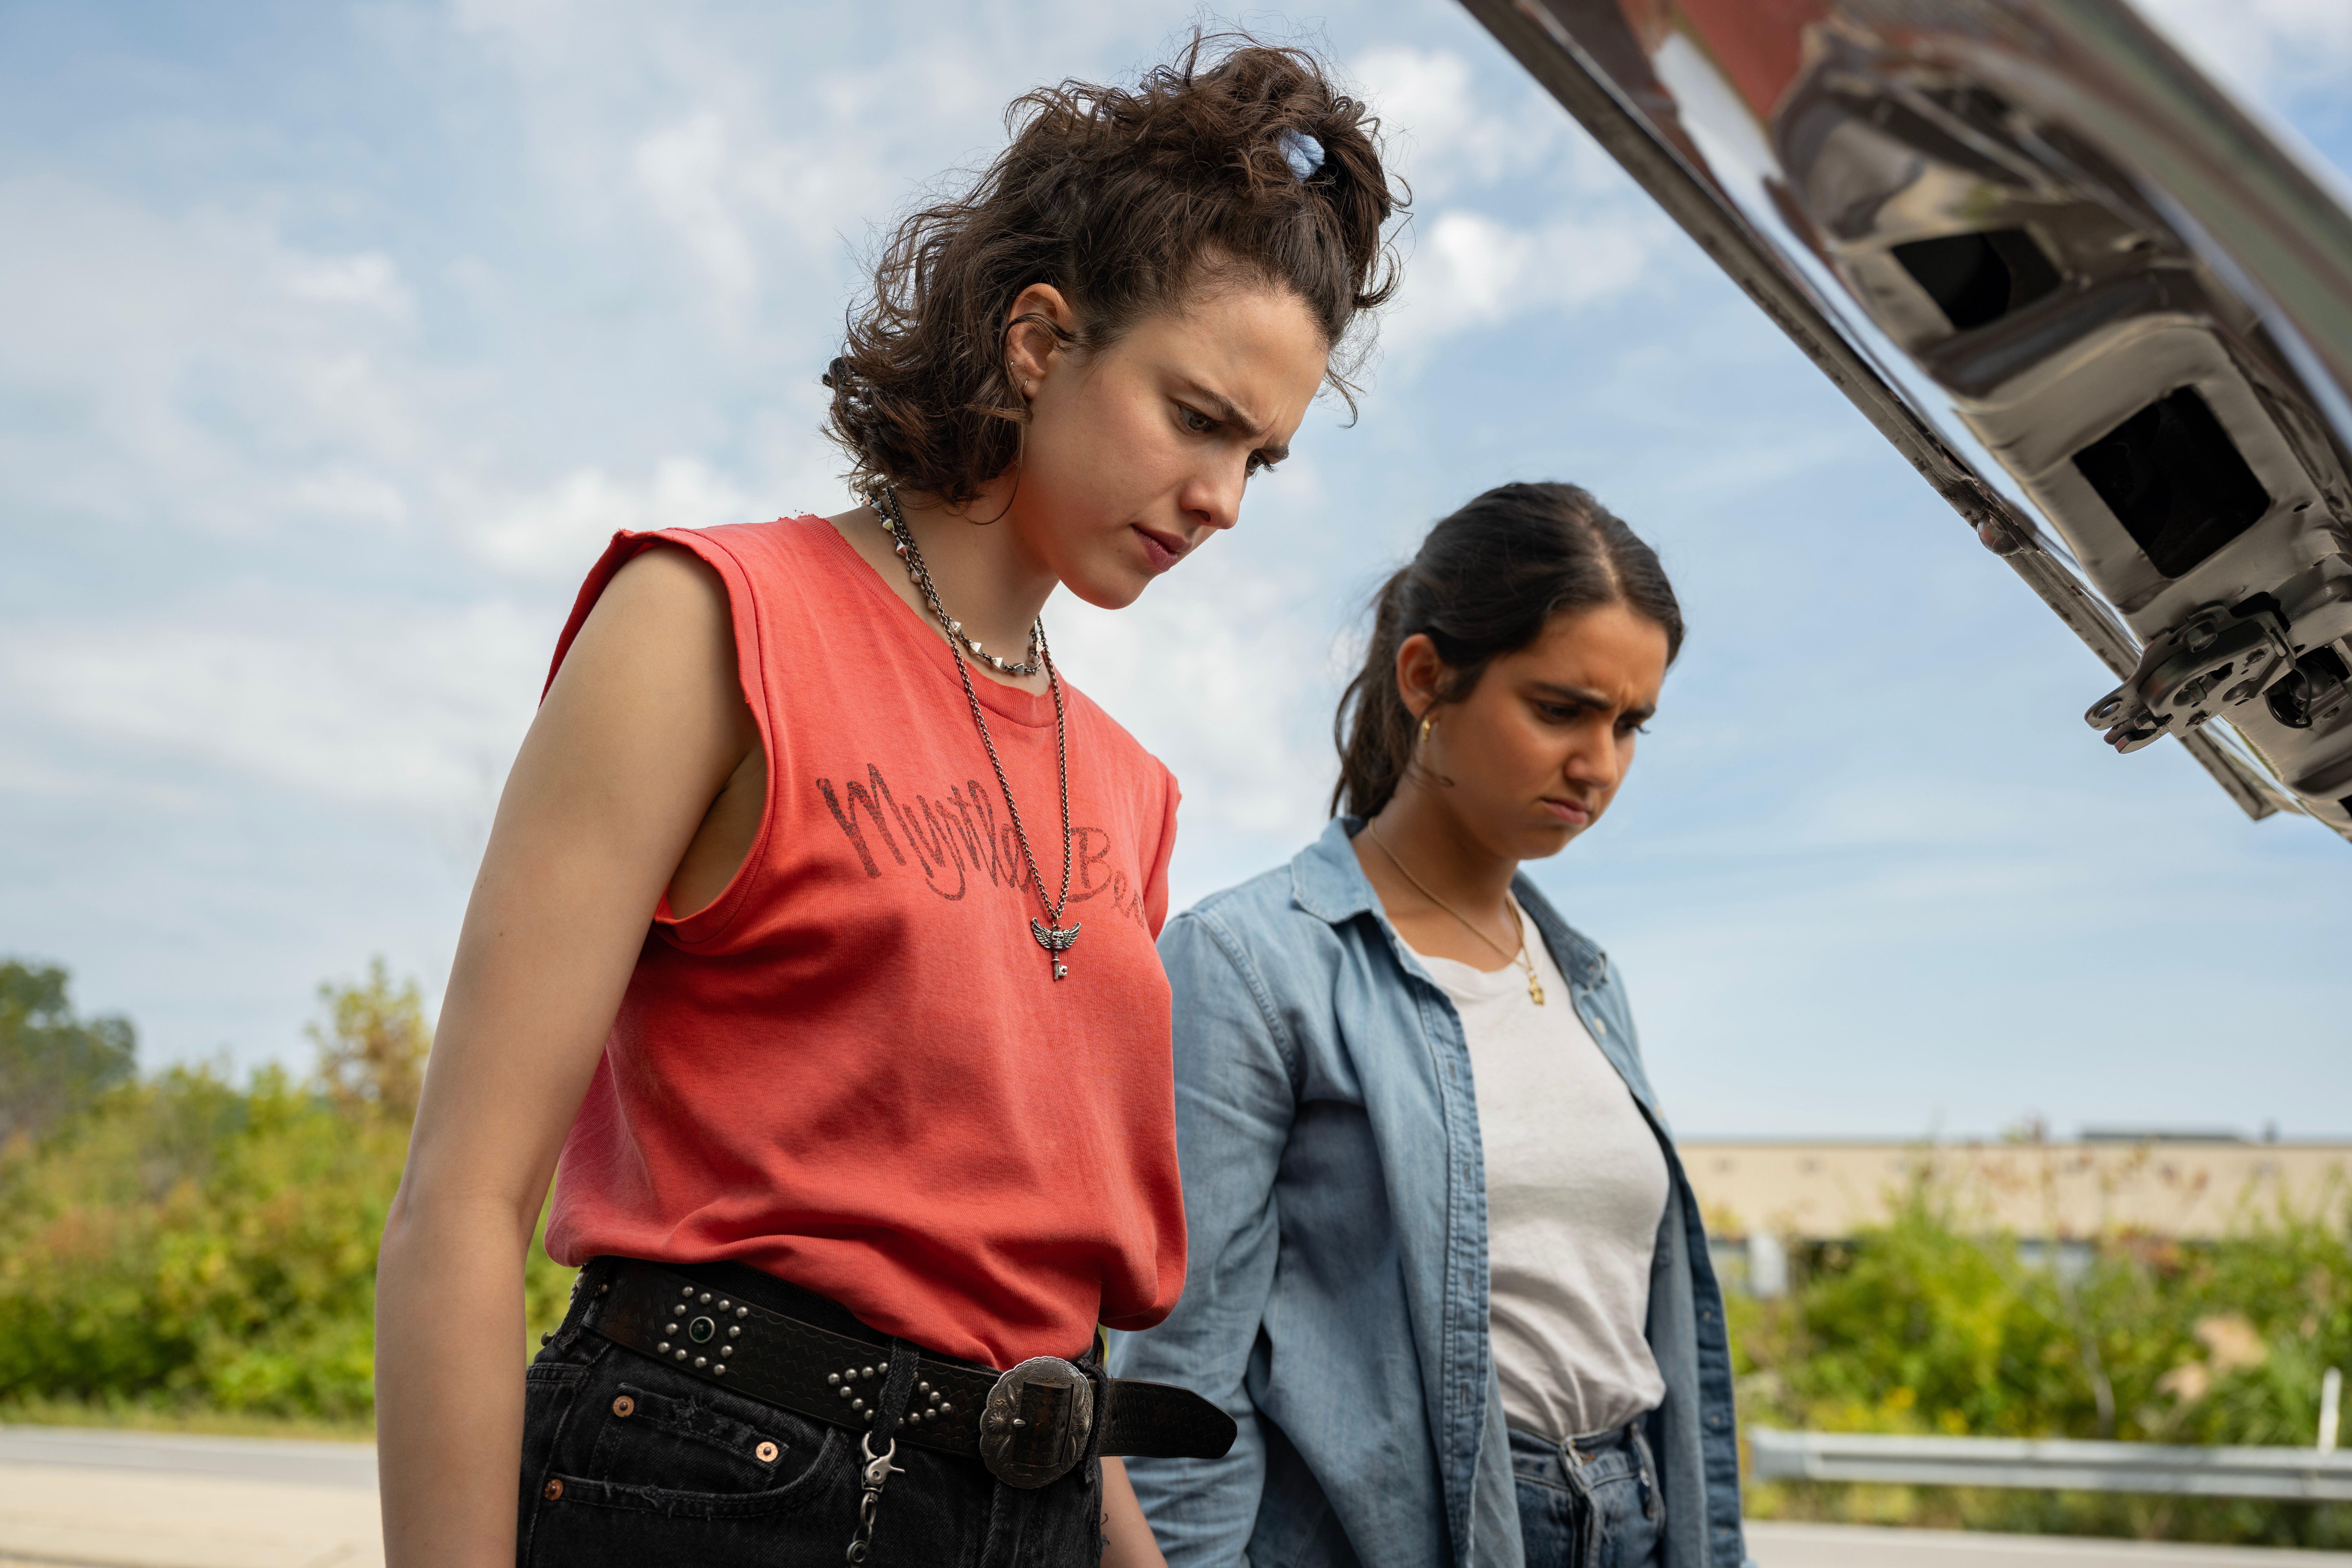 The dolls: Margaret Qualley and Viswanathan in ‘Drive-Away Dolls’